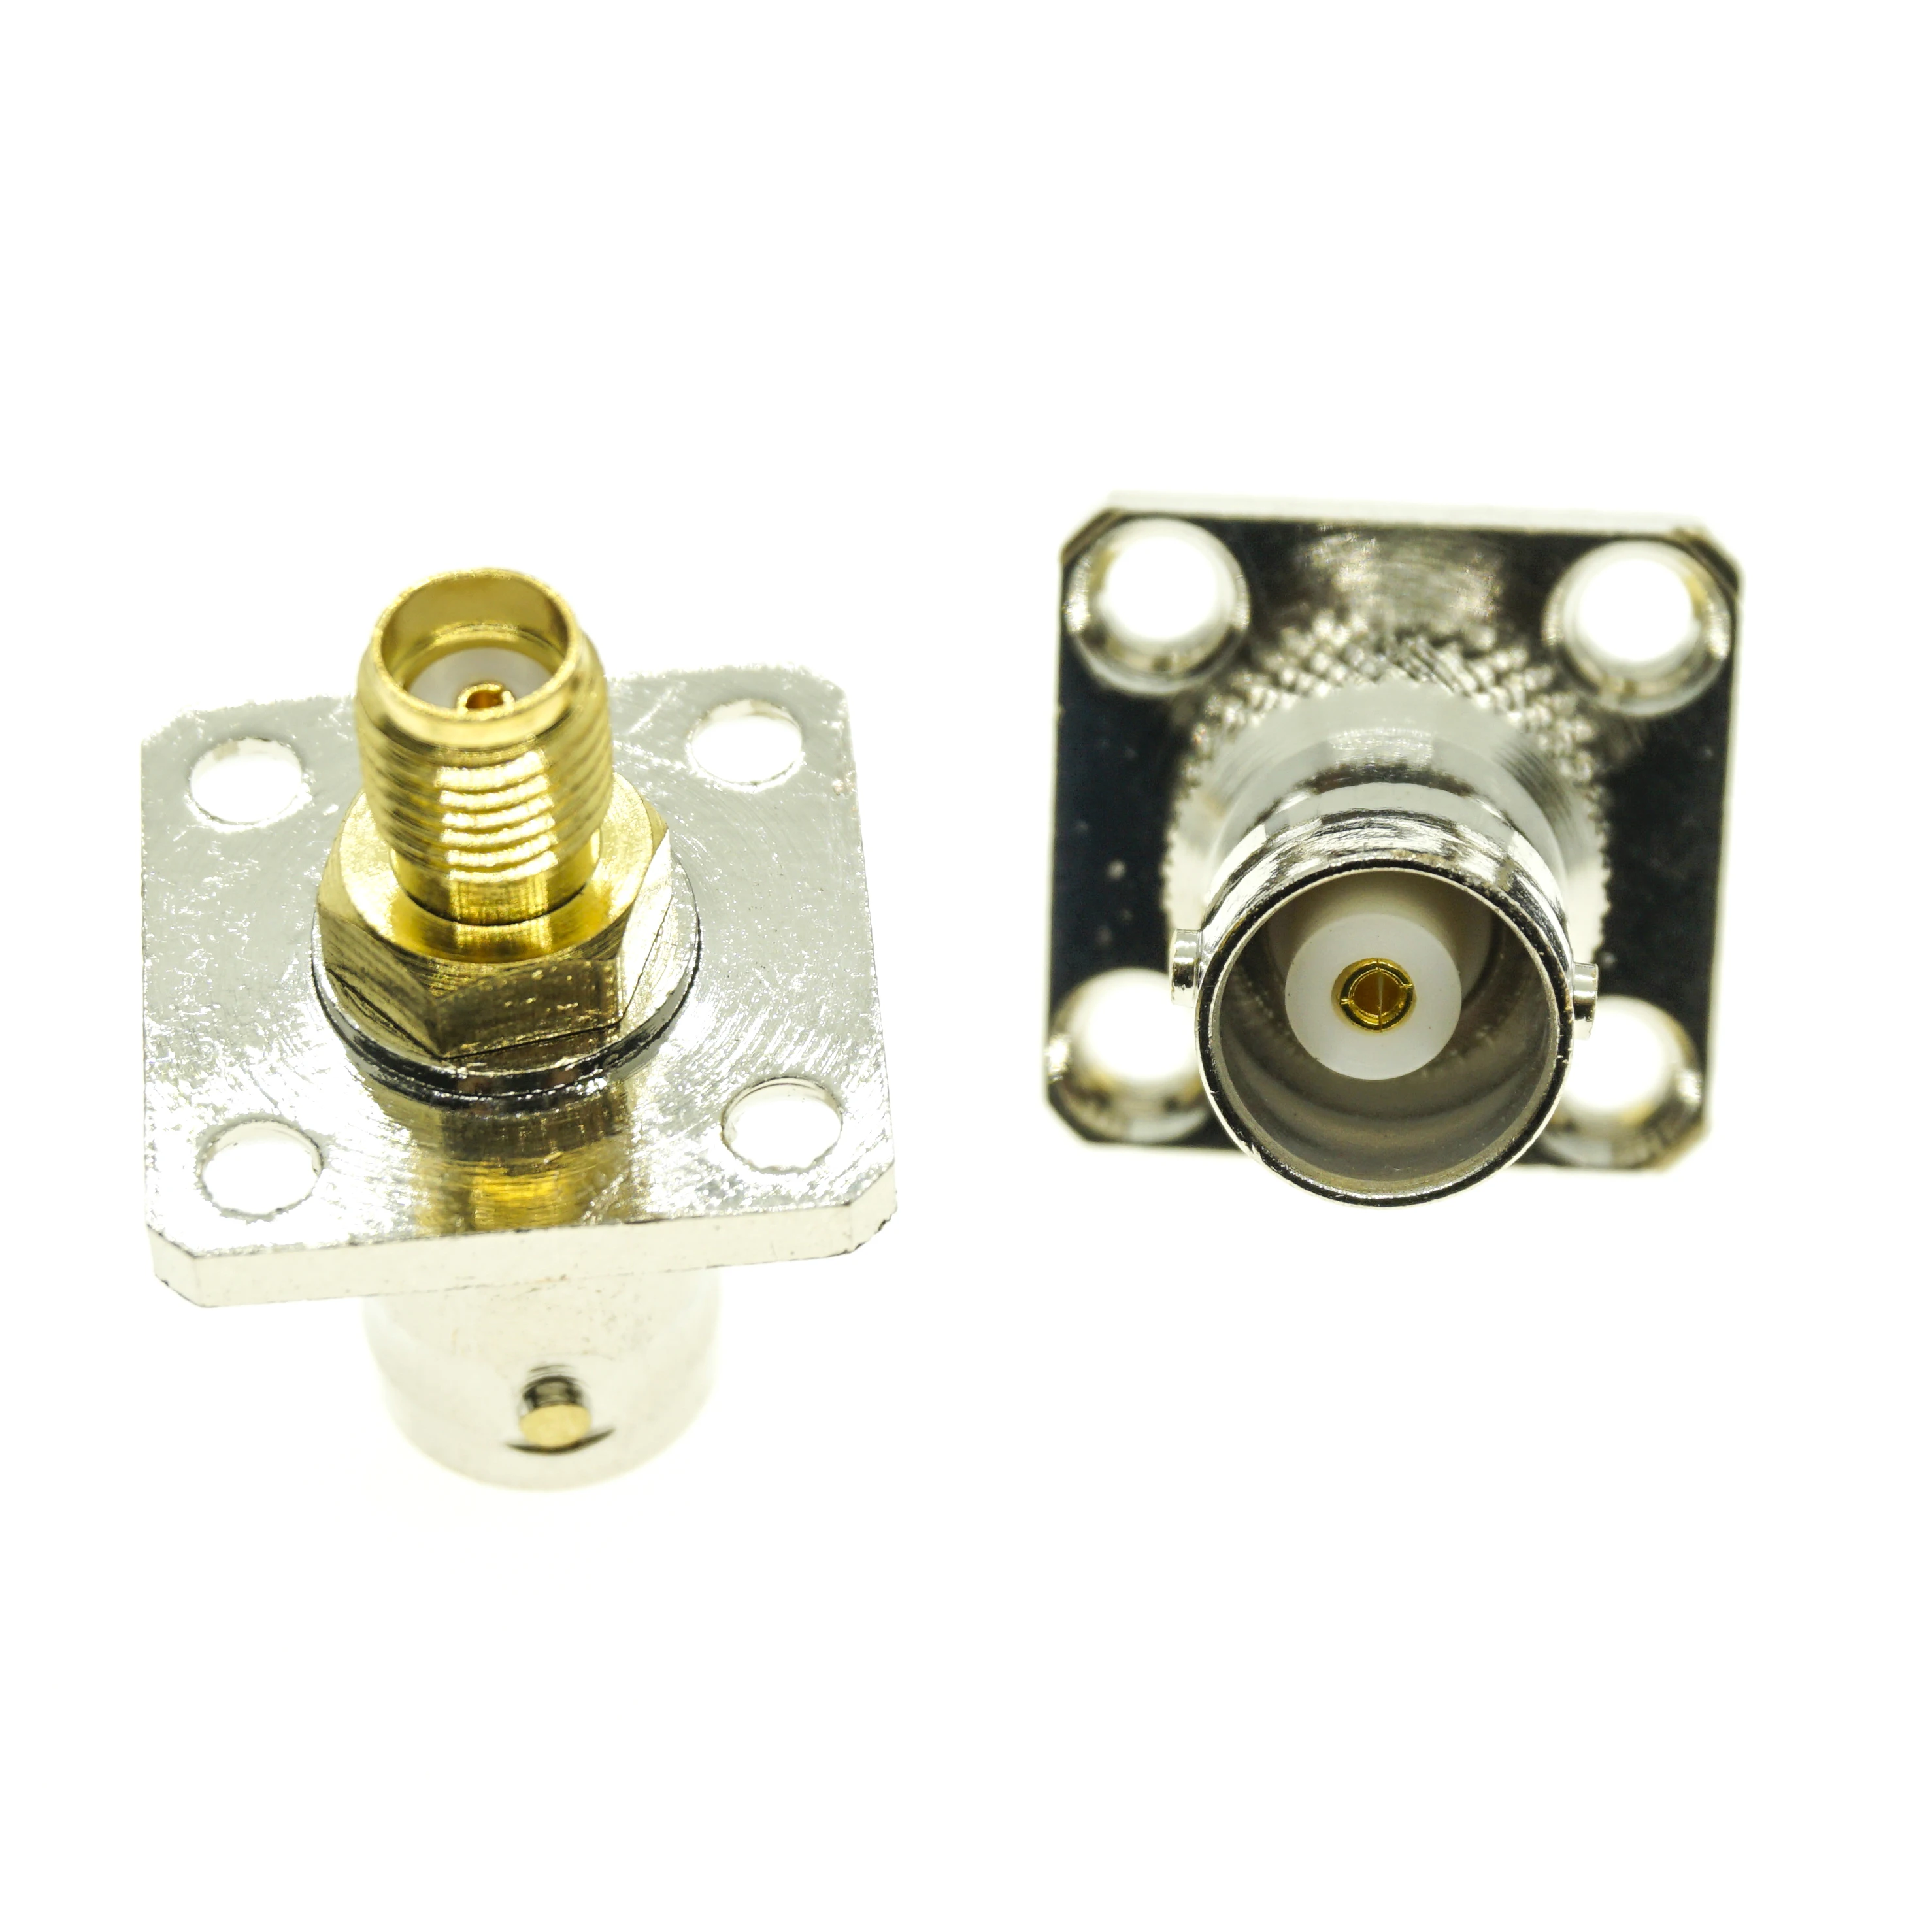 

BNC To SMA Connector Socket Q9 BNC Female To SMA Female Plug 4 Hole Flange Panel Mount Nickel Brass RF Coaxial Adapters